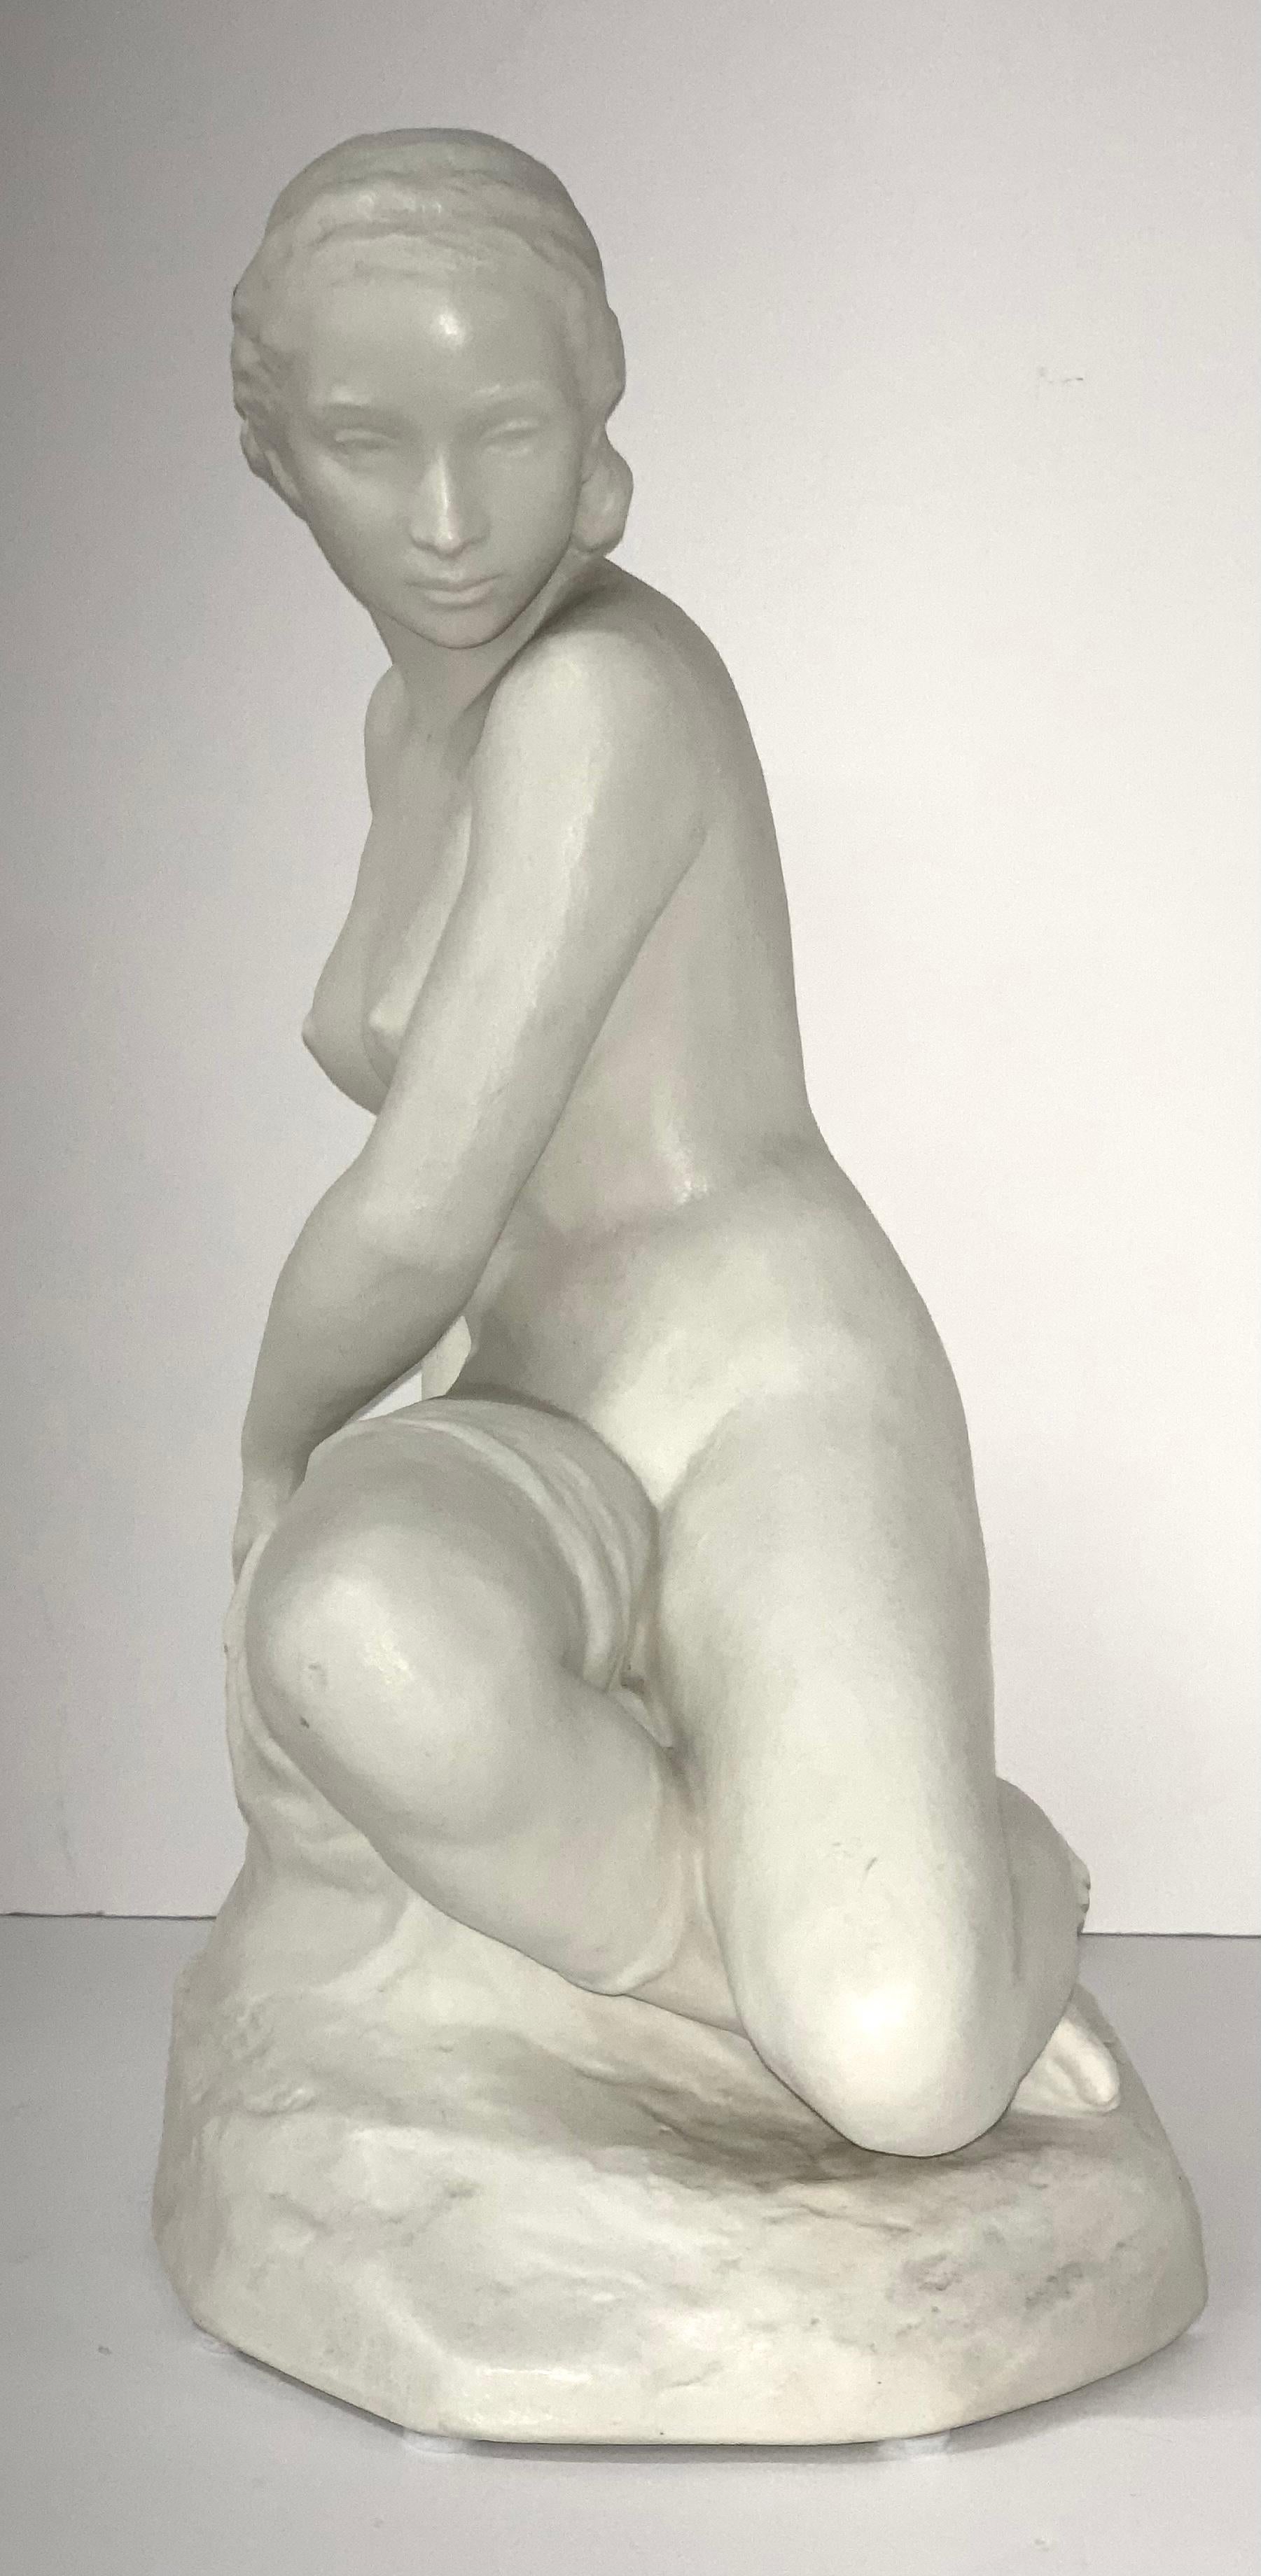 A nice porcelain or parian type figurine of a nude female by Rudolf Kaesbach for Rosenthal. In very good condition signed on the base and marked Rosenthal on the bottom. It is 12 inches tall and approximately 8 inches wide and 6 inches deep.
    